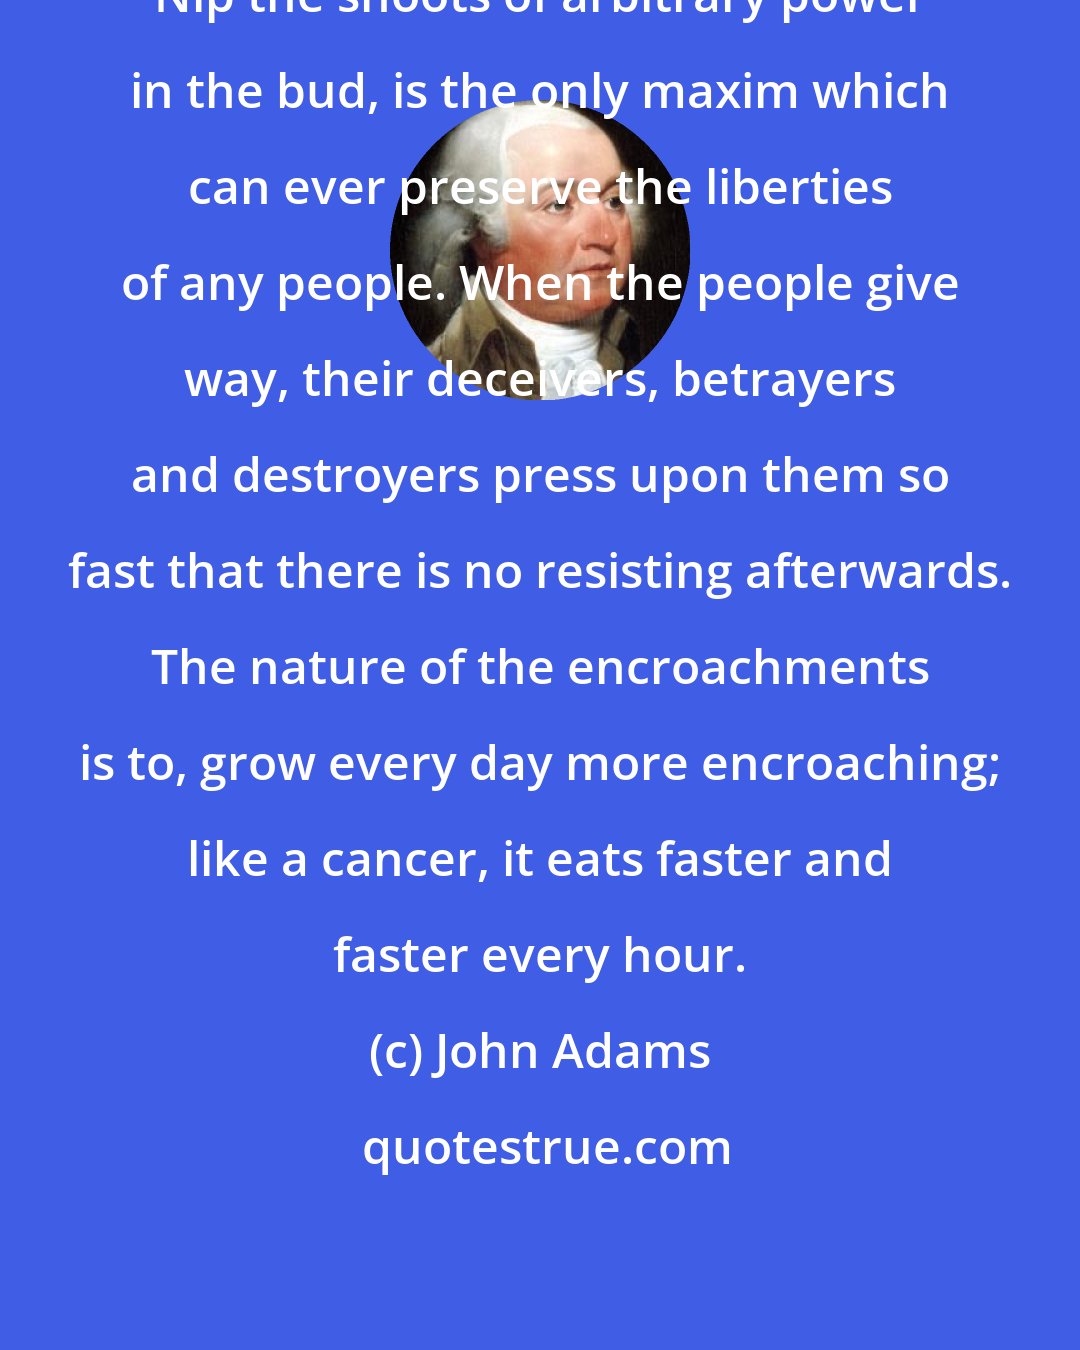 John Adams: Nip the shoots of arbitrary power in the bud, is the only maxim which can ever preserve the liberties of any people. When the people give way, their deceivers, betrayers and destroyers press upon them so fast that there is no resisting afterwards. The nature of the encroachments is to, grow every day more encroaching; like a cancer, it eats faster and faster every hour.